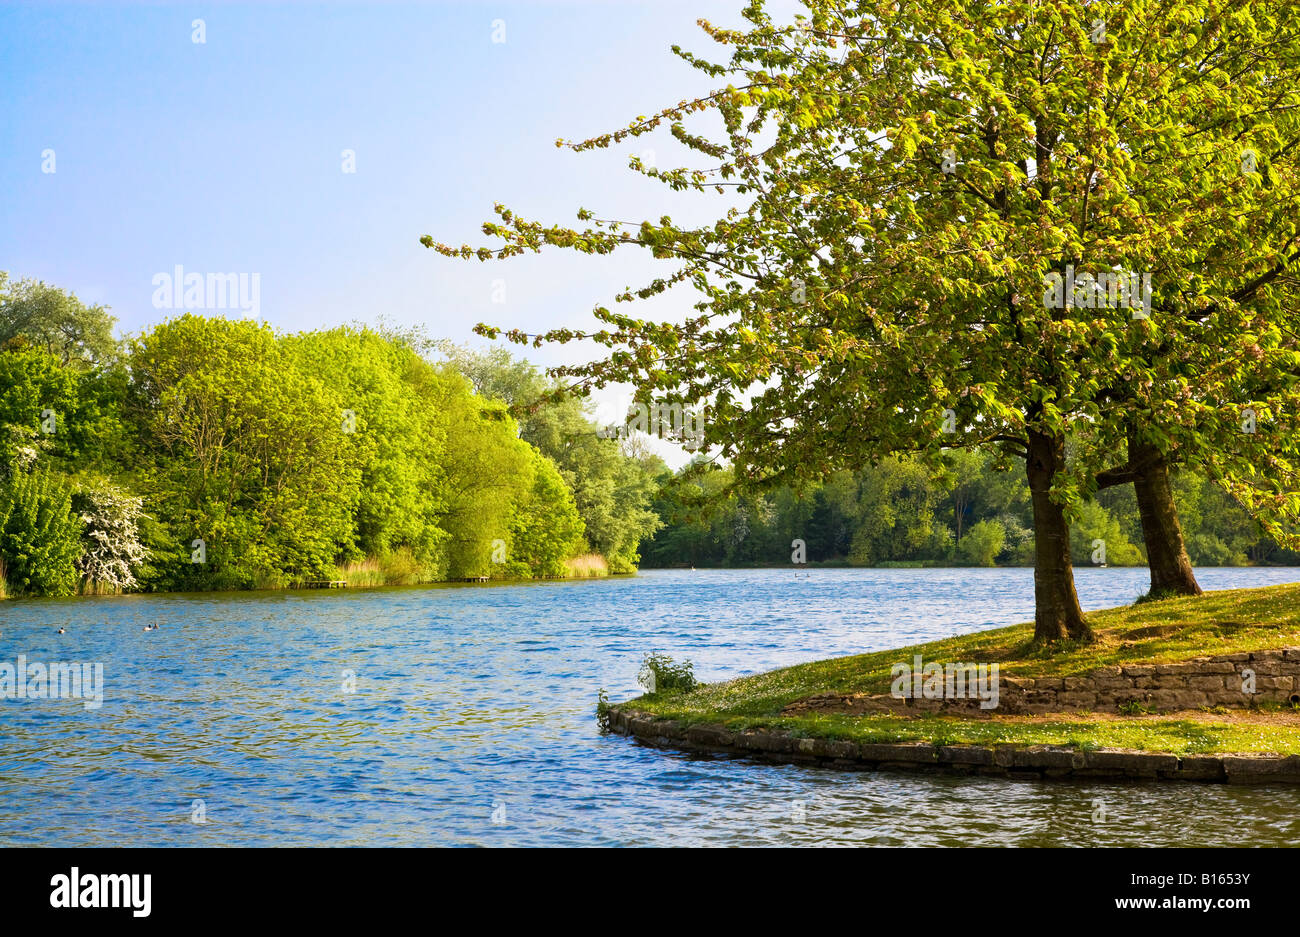 The lake on a sunny day in summer at Coate Water Country Park, a local nature reserve near Swindon, Wiltshire, England, UK Stock Photo